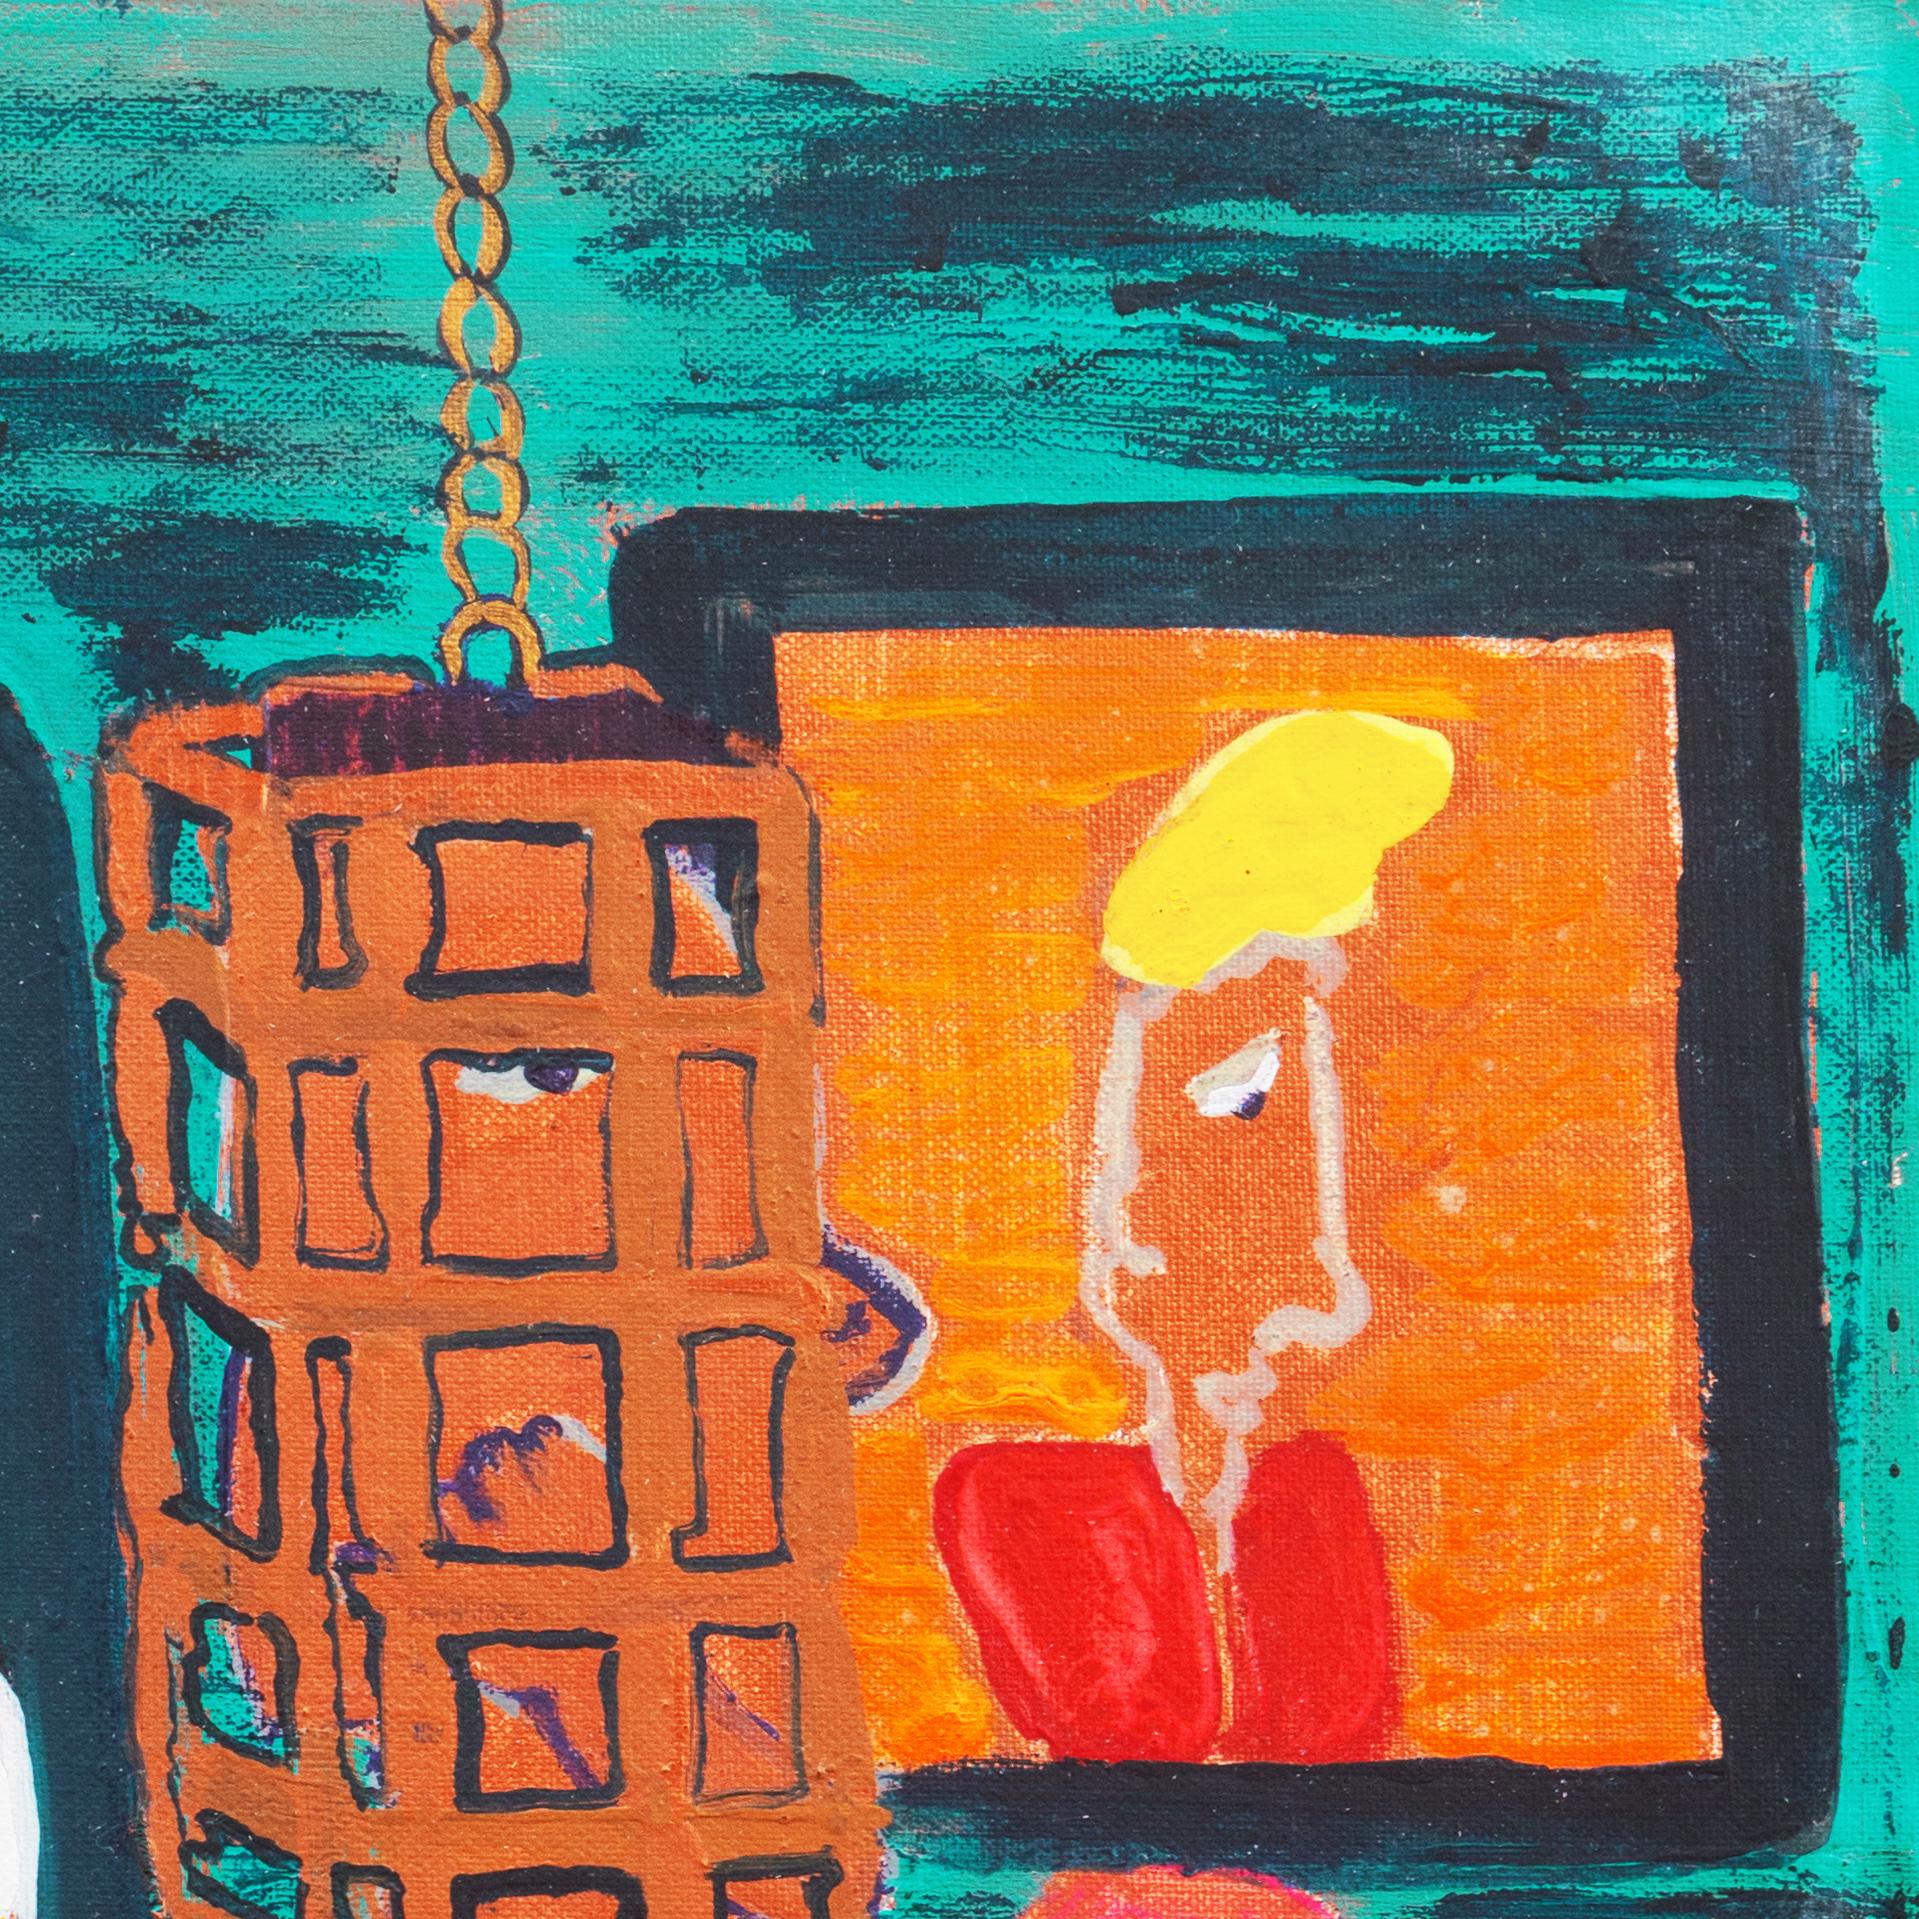 'Lovers in a Doorway', American Folk Art, Outsider artist, Figural painting - Outsider Art Painting by J.P.